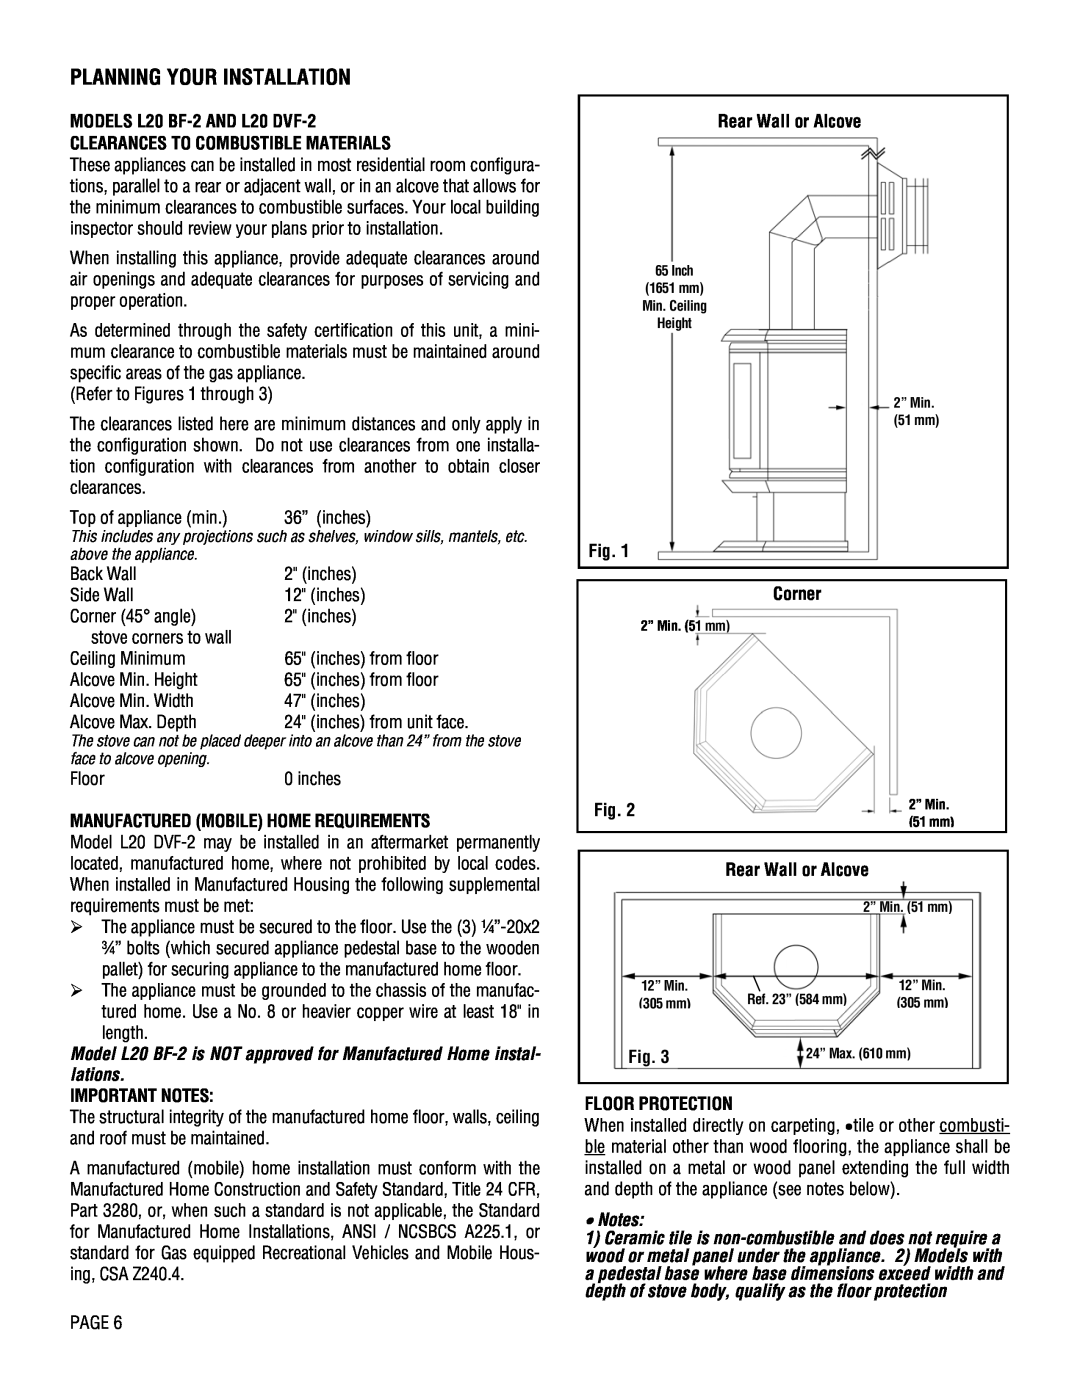 Lennox Hearth manual Planning Your Installation, MODELS L20 BF-2AND L20 DVF-2, Clearances To Combustible Materials 